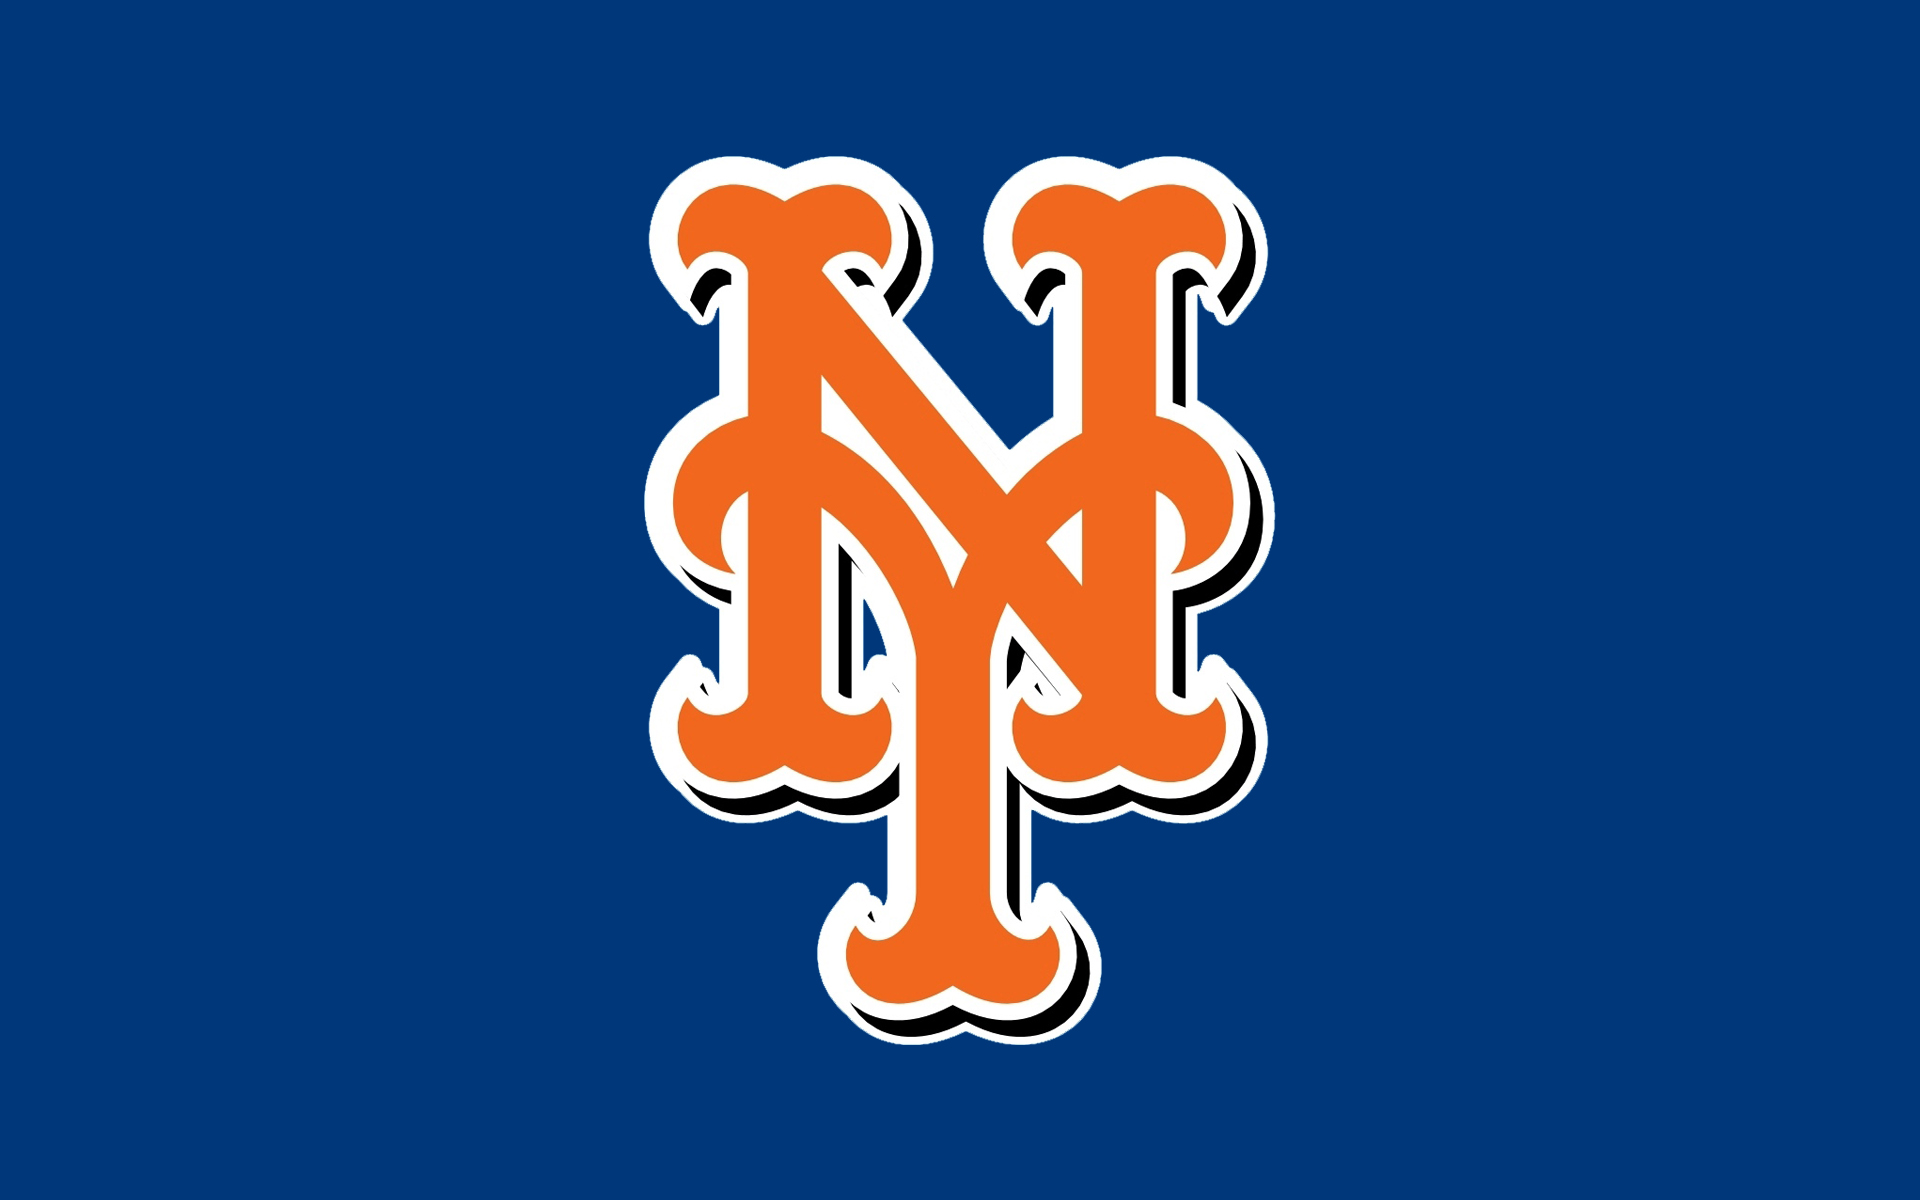  Wallpapers Download Free Pictures Images and Photos New York Mets